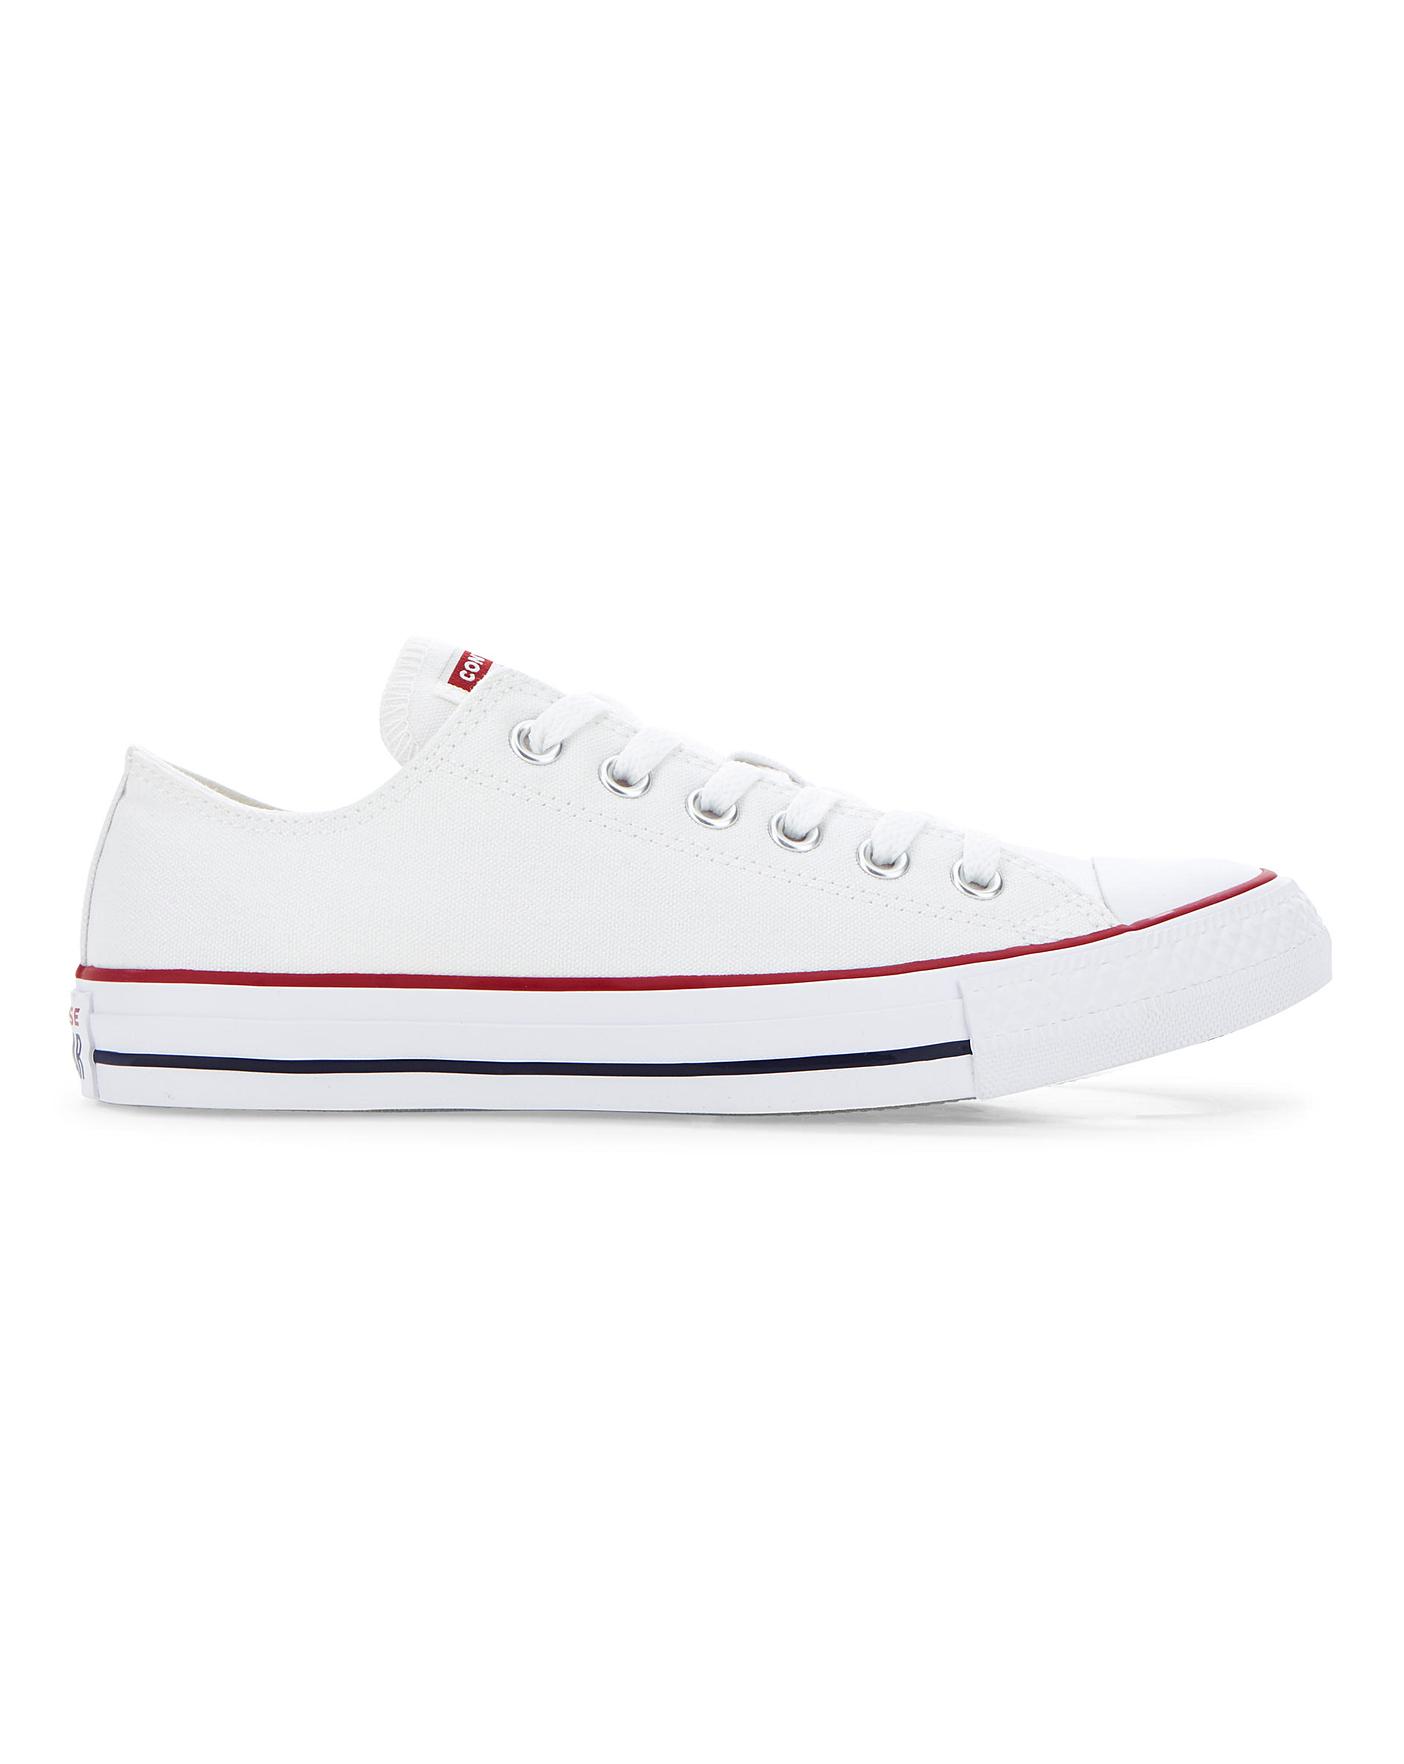 converse all star ox review